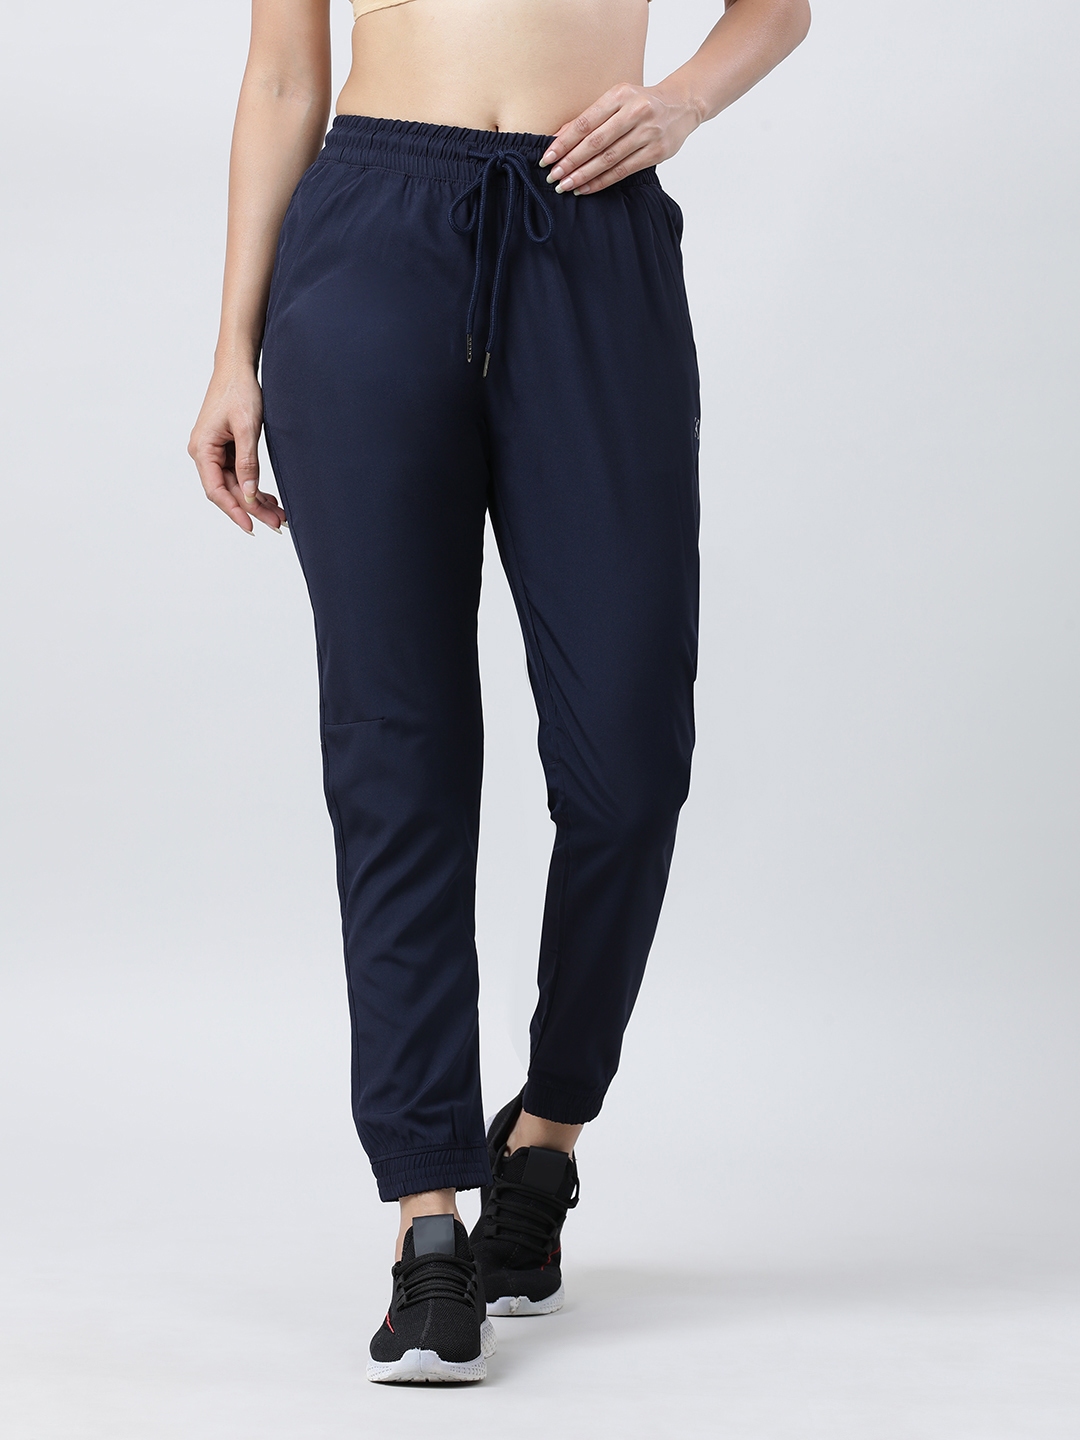 Imperative Women's Slim Fit Polyester Track Pant